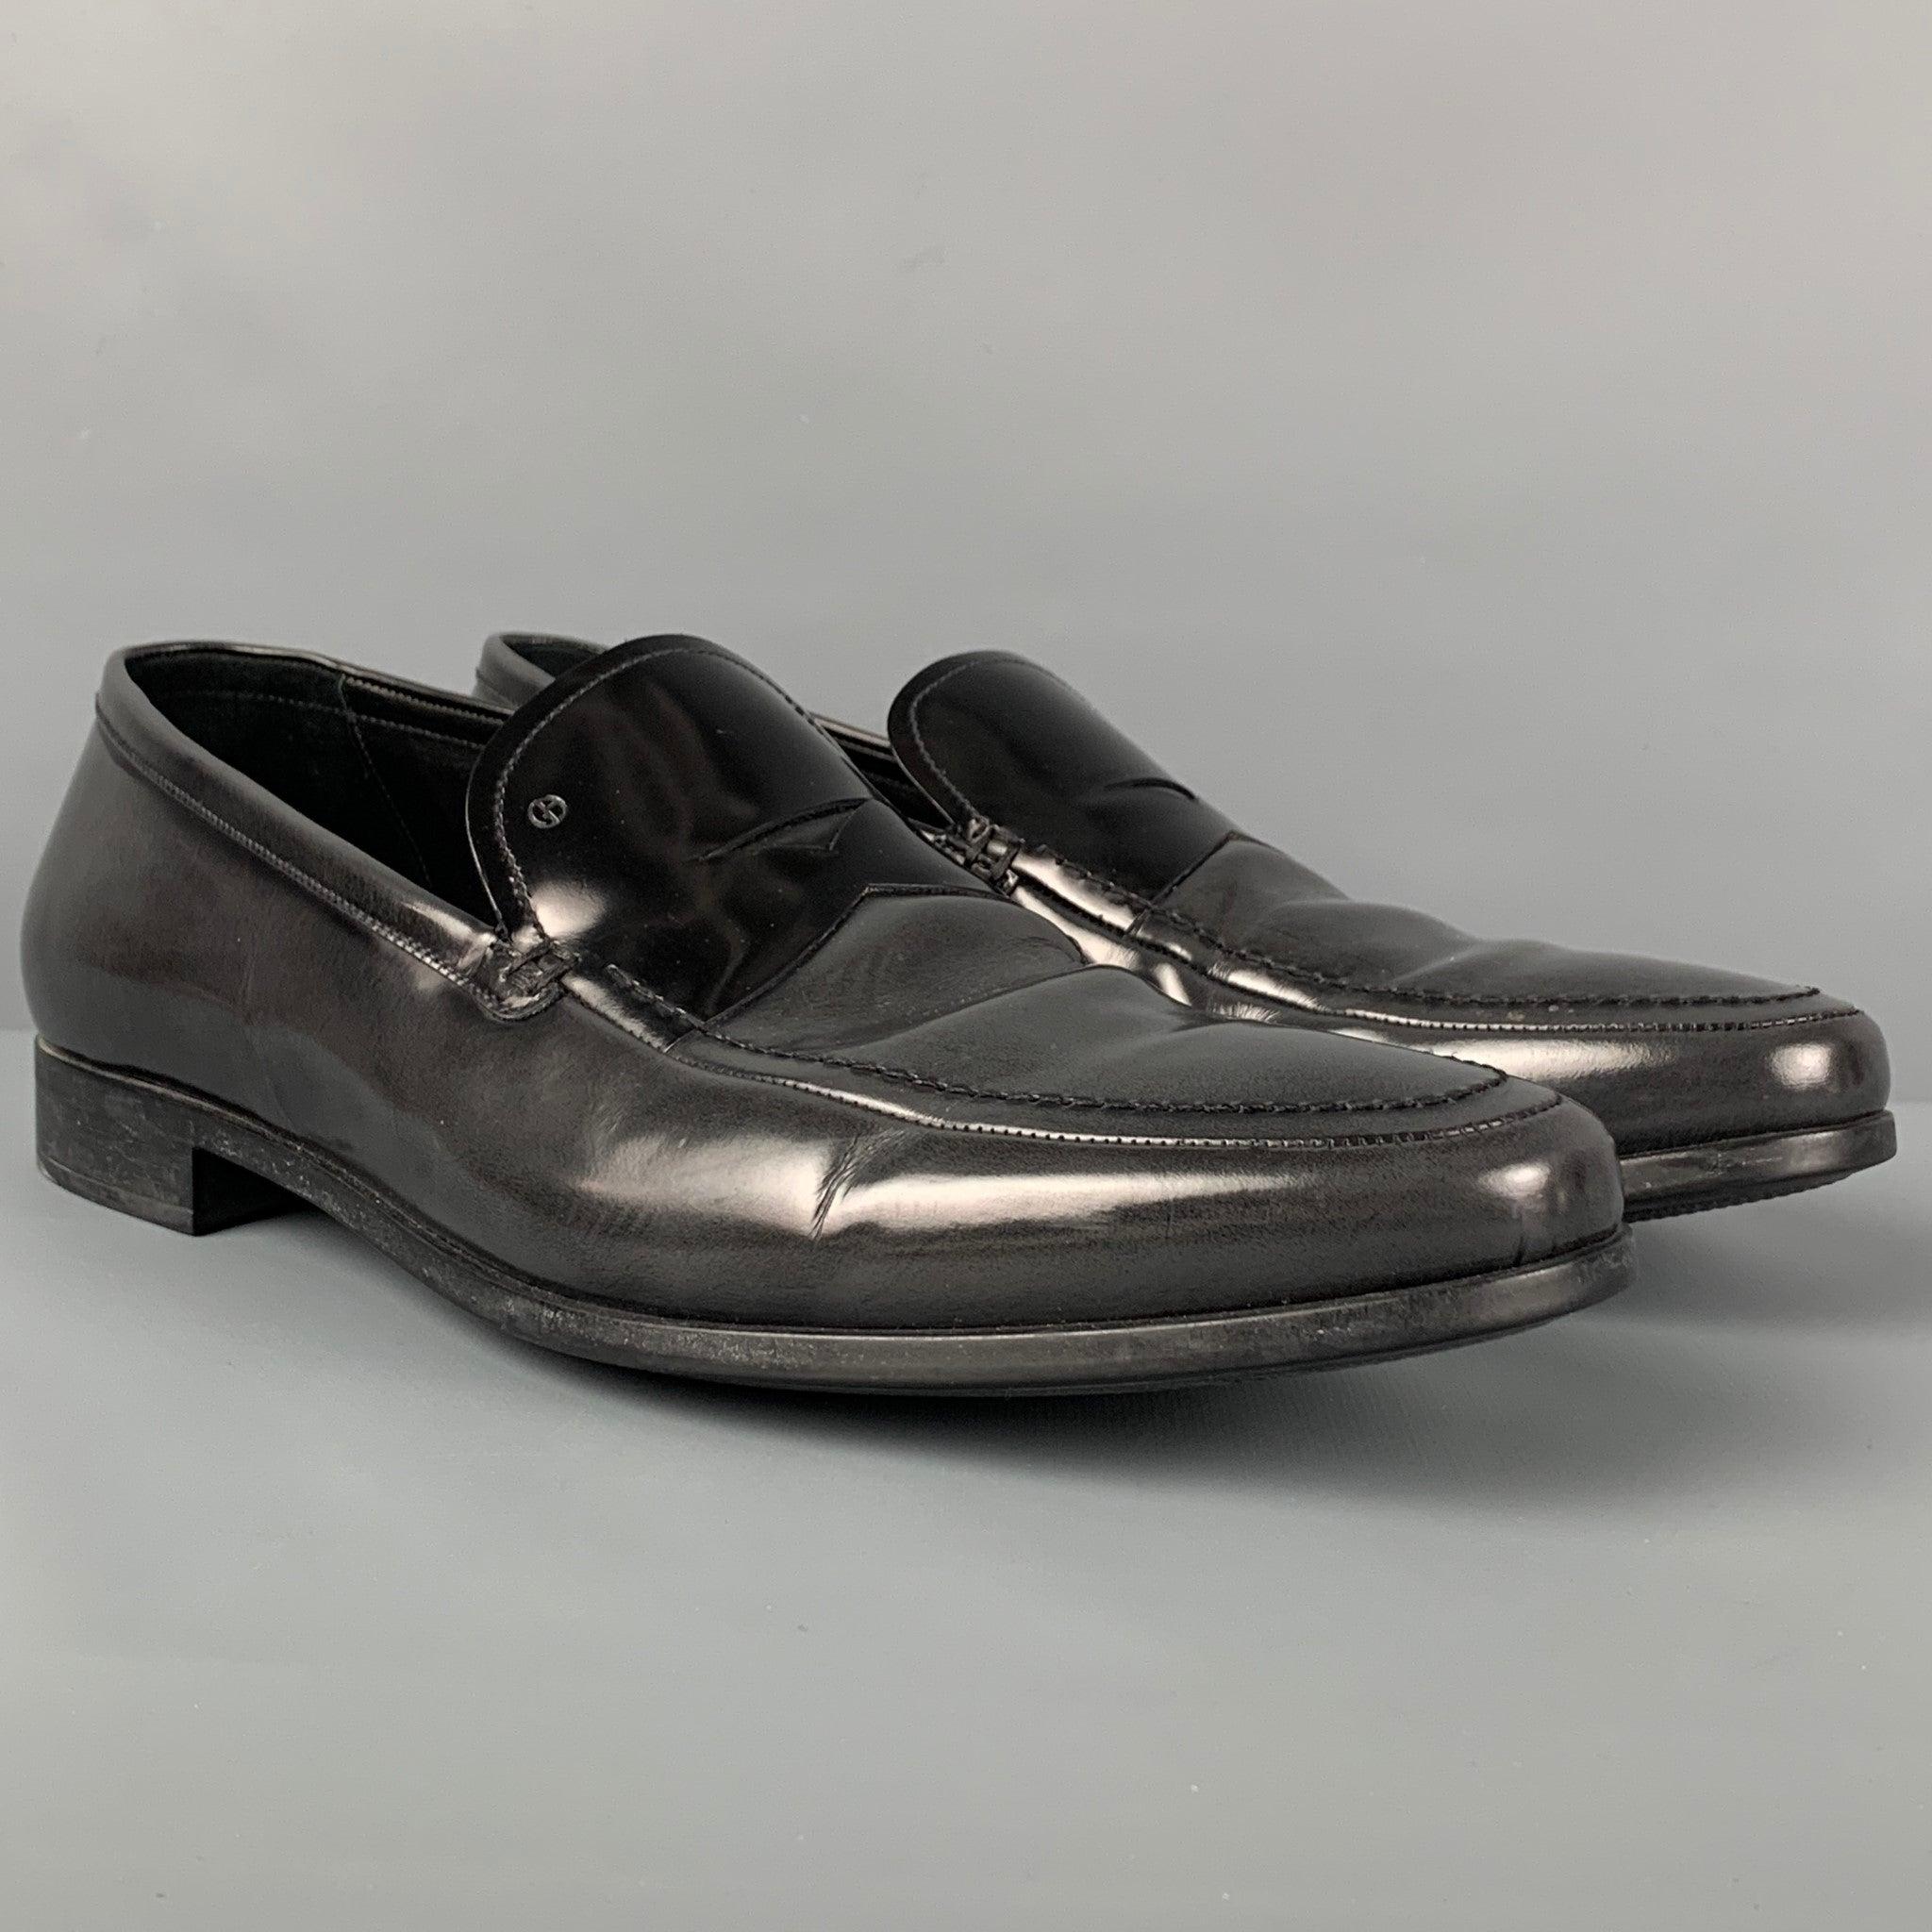 GIORGIO ARMANI loafers comes in a charcoal & black ombre leather featuring a slip on style. Comes with box. Made in Italy.
Very Good
Pre-Owned Condition. 

Marked:   10Outsole: 12.5 inches  x 4 inches 
  
  
 
Reference: 118379
Category: